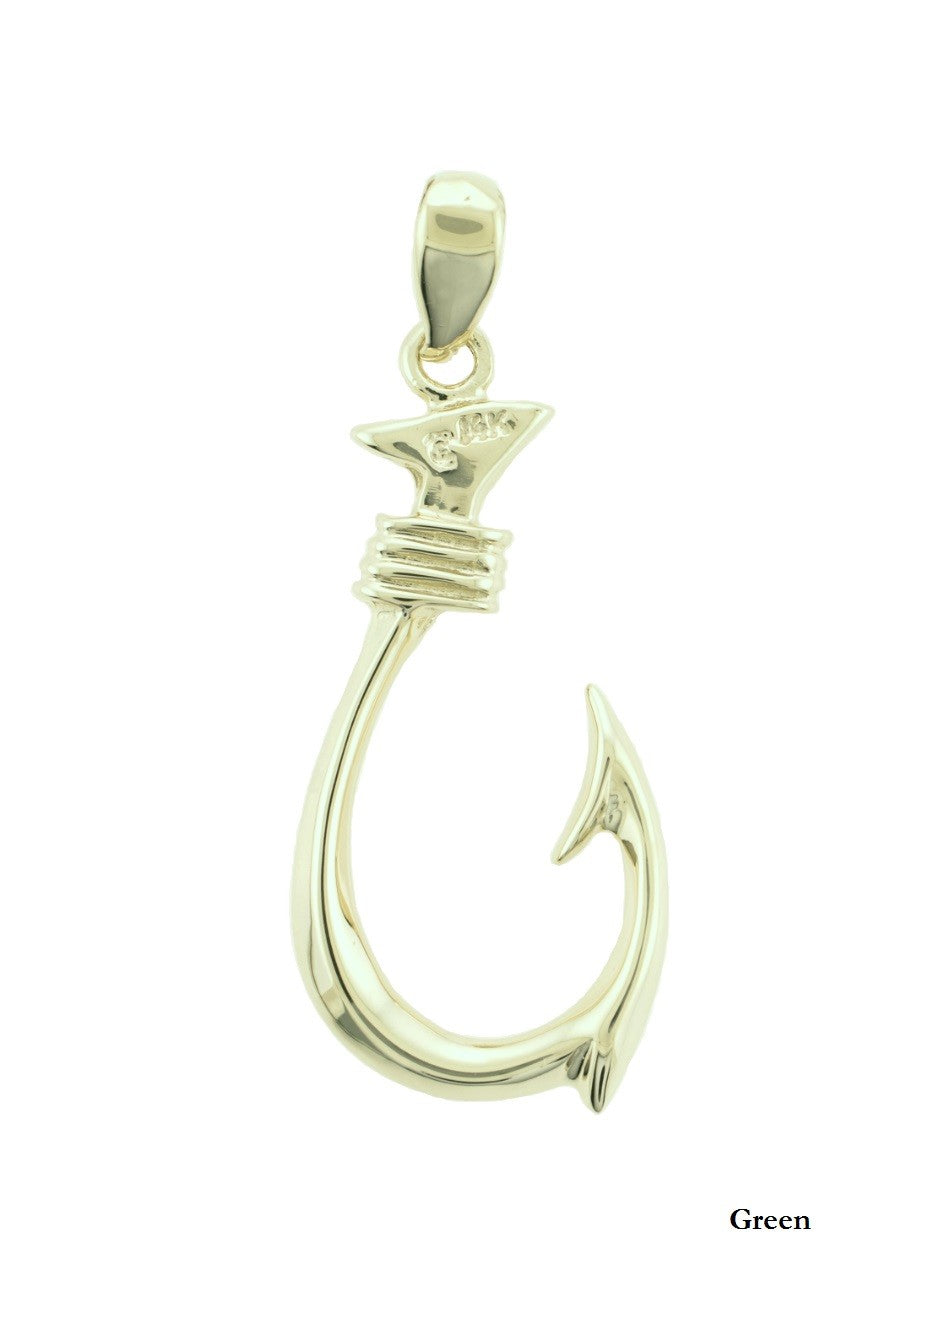 Hawaiian Fish Hook Necklace by Austaras - Necklace Pendant for Women and  Men - 14K Gold Hypoallergenic Jewelry with Chain Made of 316L Stainless  Steel